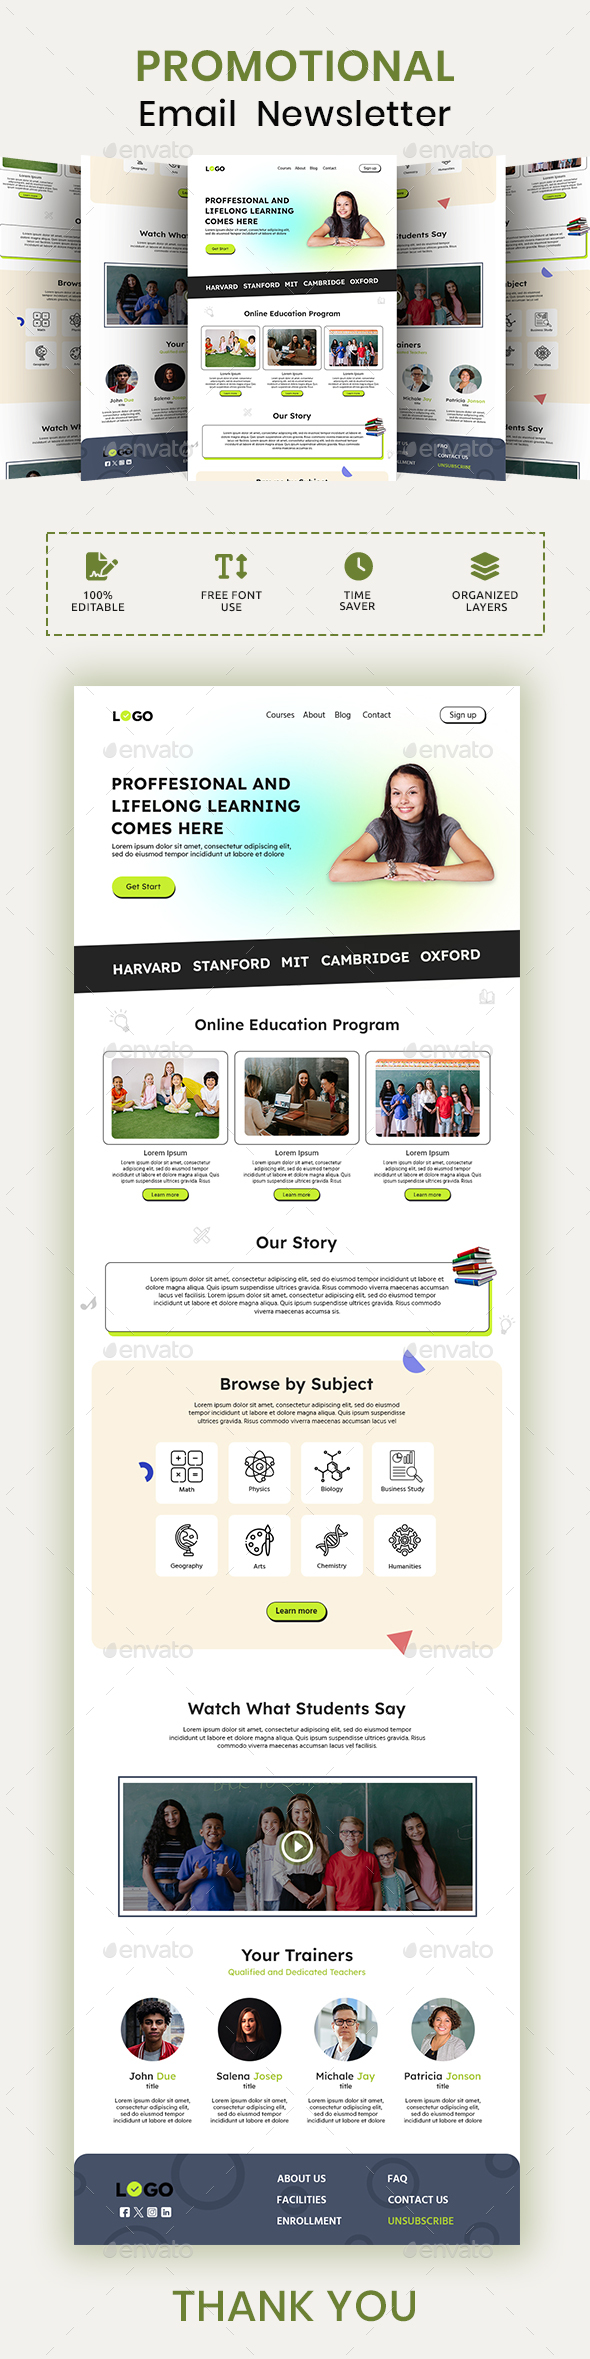 [DOWNLOAD]Learning Education Email Newsletter PSD Template